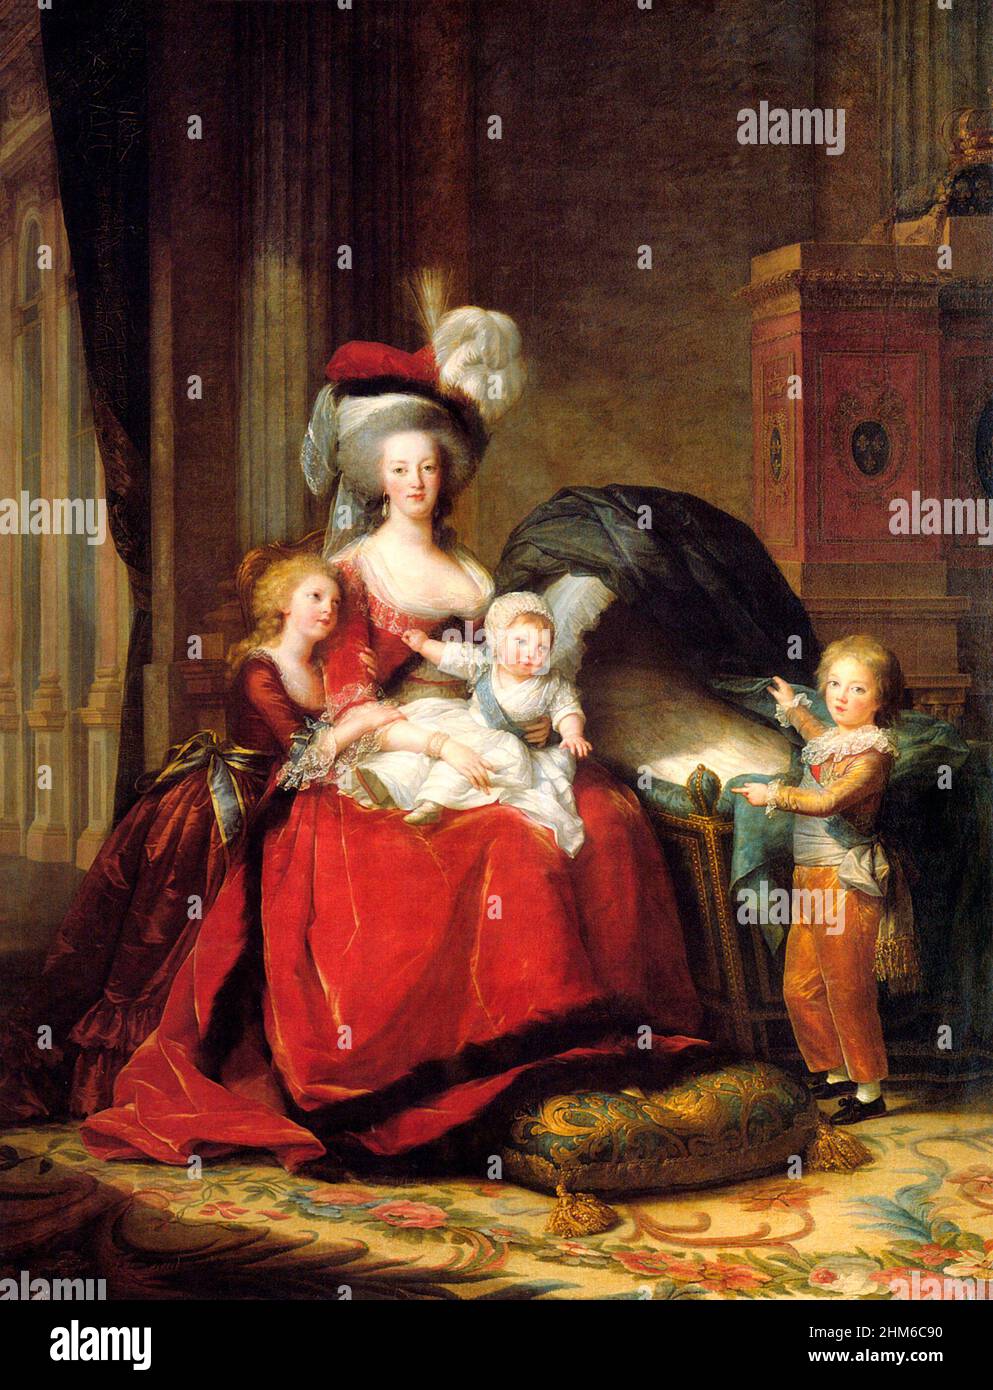 Marie Antoinette and her Children - Elisabeth Louise Vigee LeBrun, 1787 Stock Photo